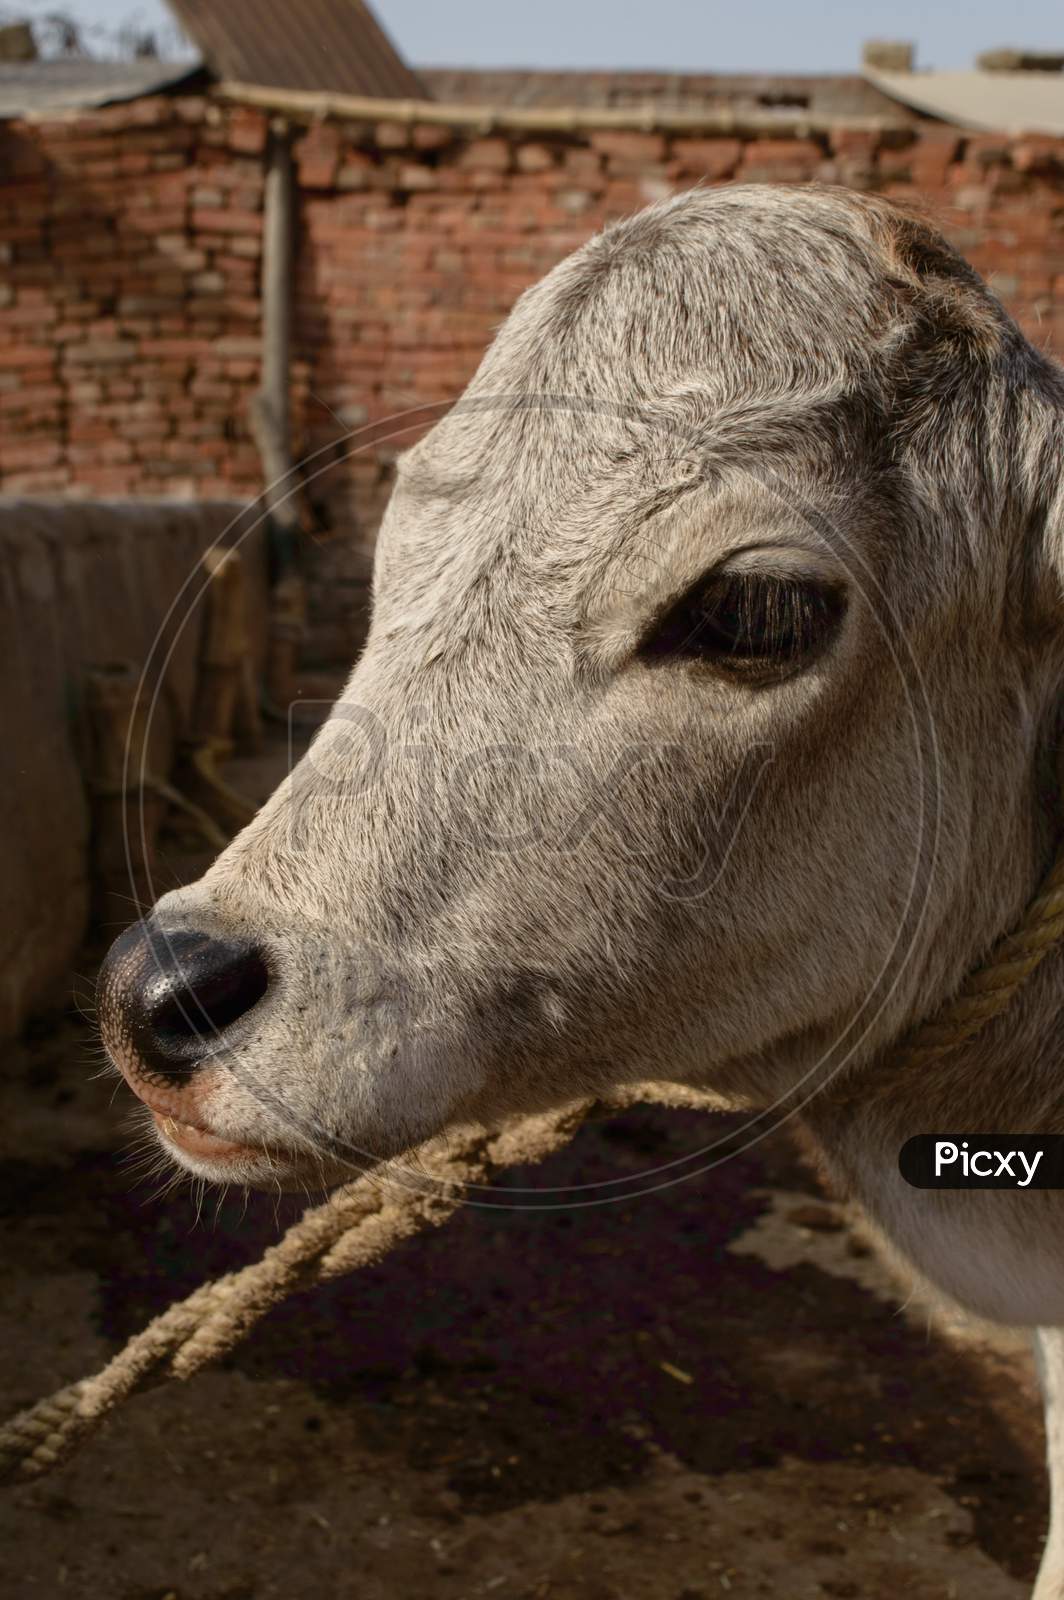 A Portrait Of Indian Baby Cow Or Calf Tie On Wooden With Rope At Farm.